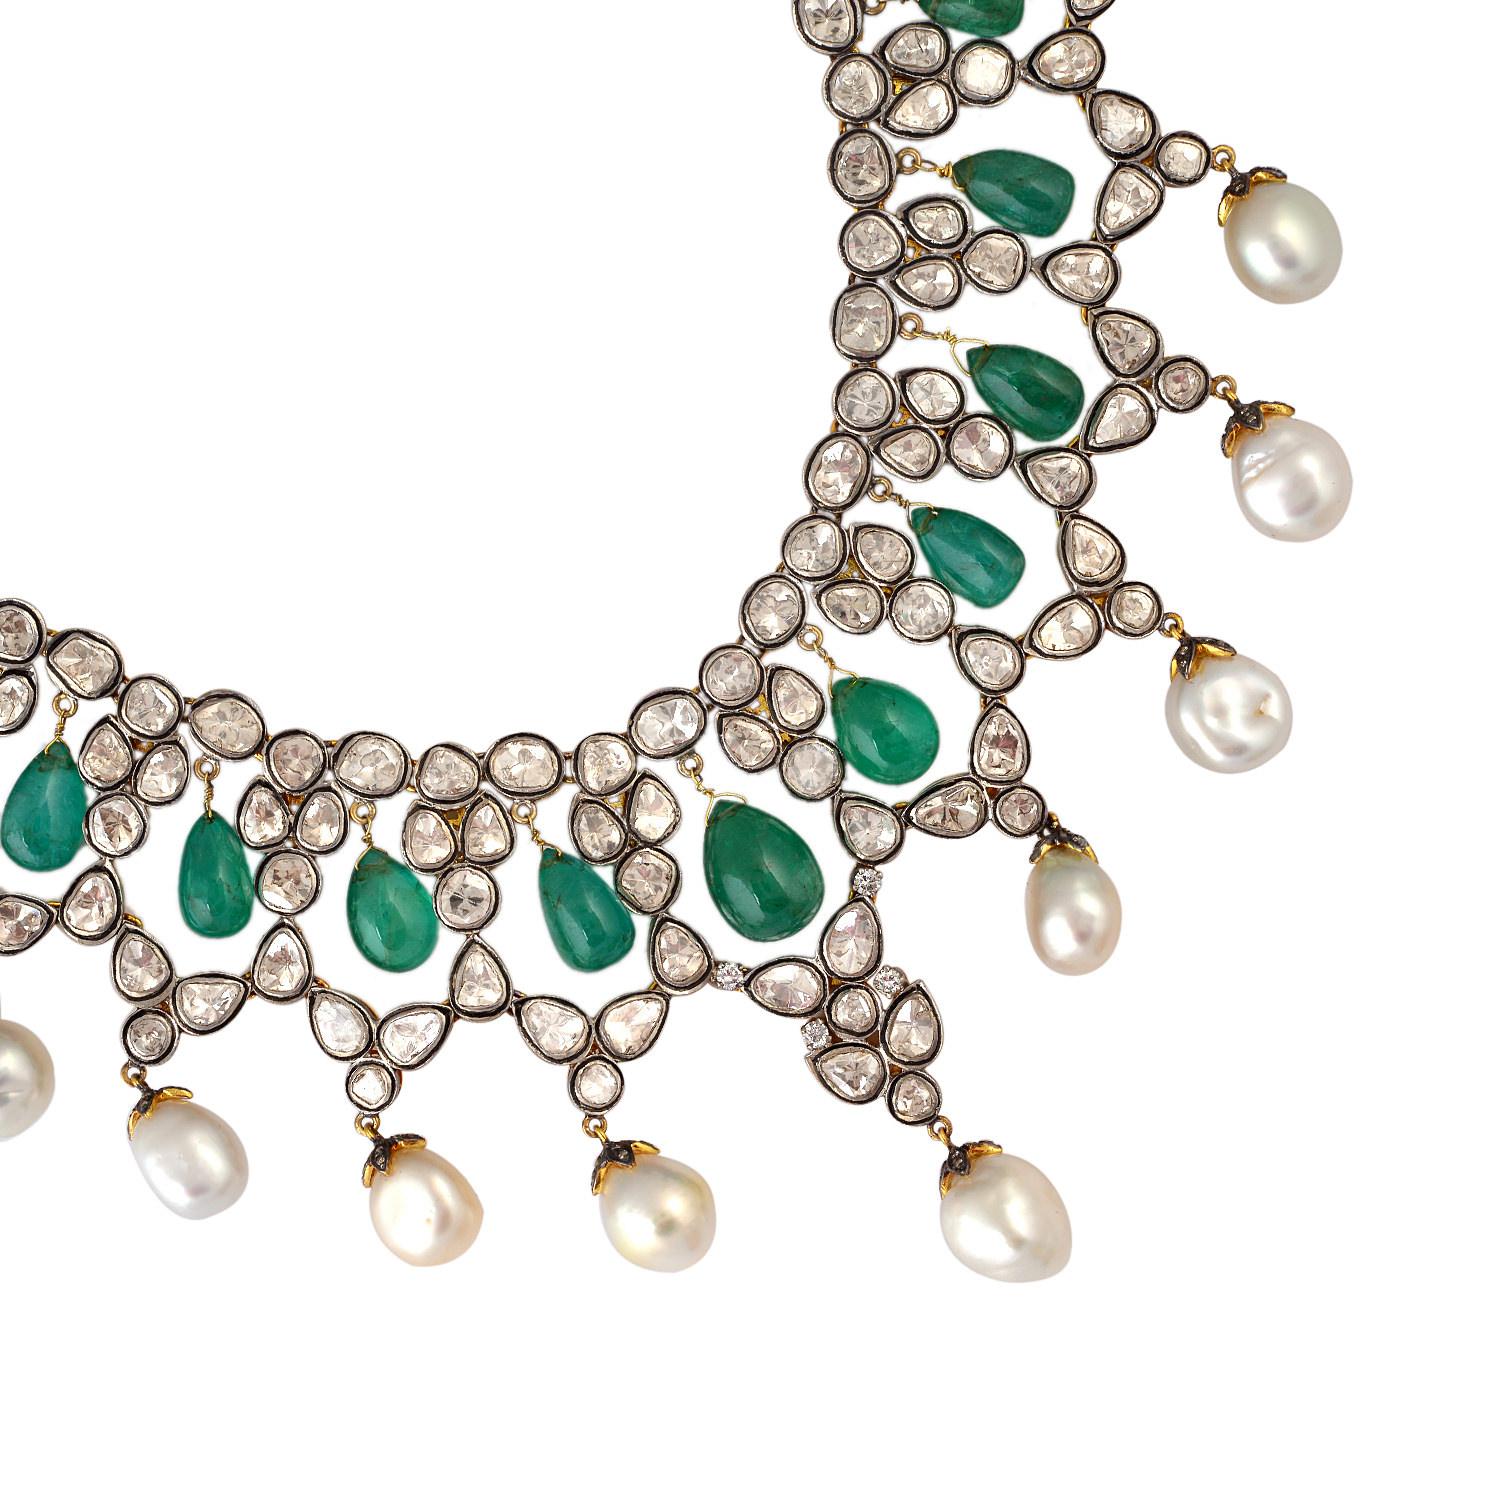 The Maharaja collection inspired by the Moghul Era & Indian heritage.
A stunning necklace handmade in 14K gold and sterling silver. It is set in 57.52 carats emerald, 104.62 carats pearl & 15.41 carats of rose cut diamonds. Lobster clasp